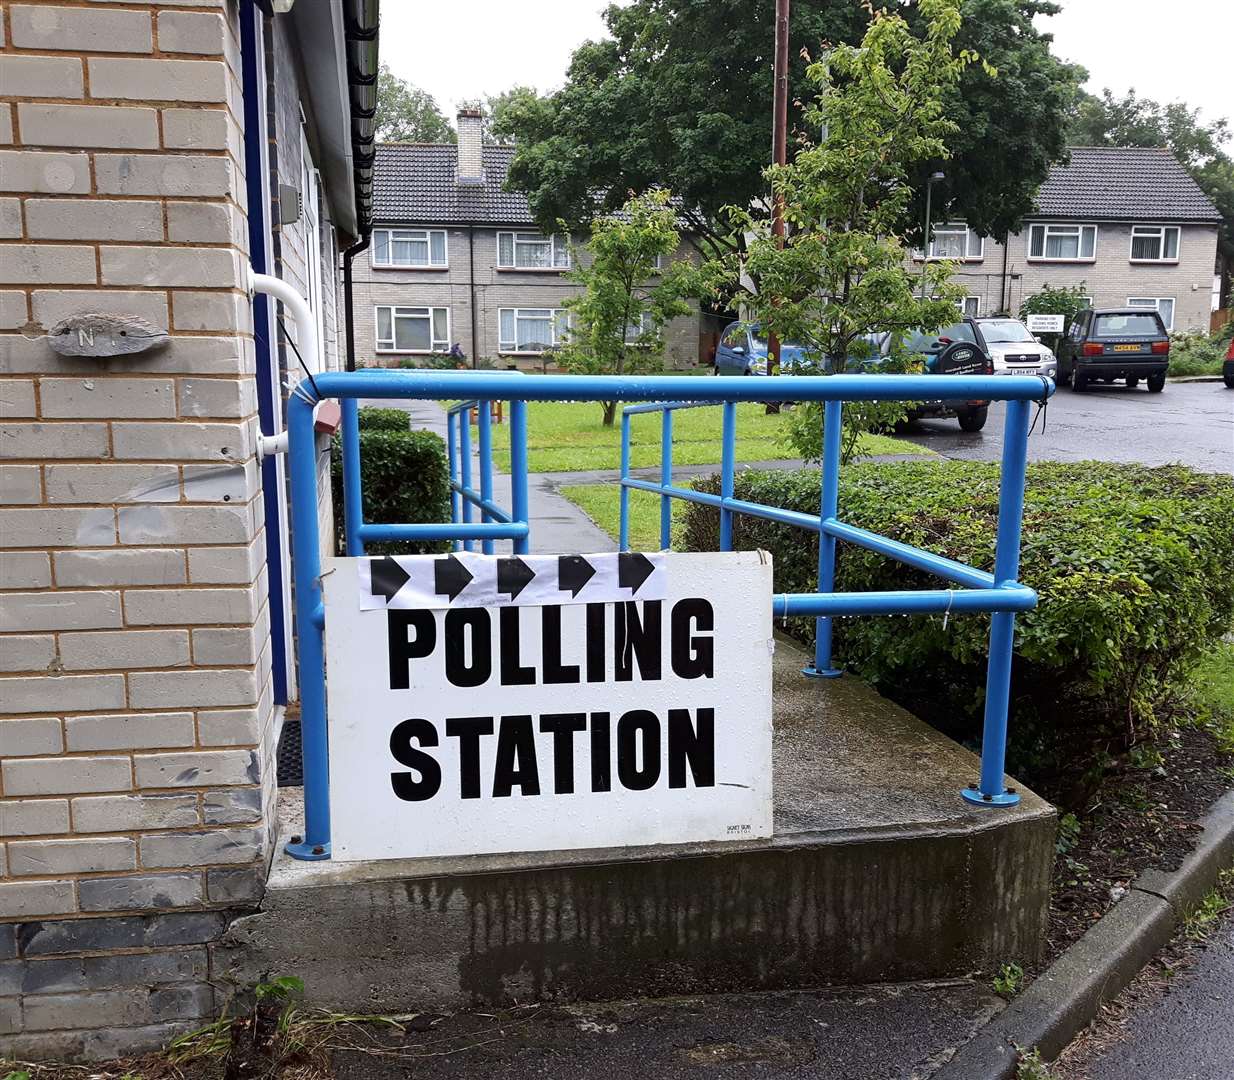 Every parish council will go to the polls at the same time as the borough council